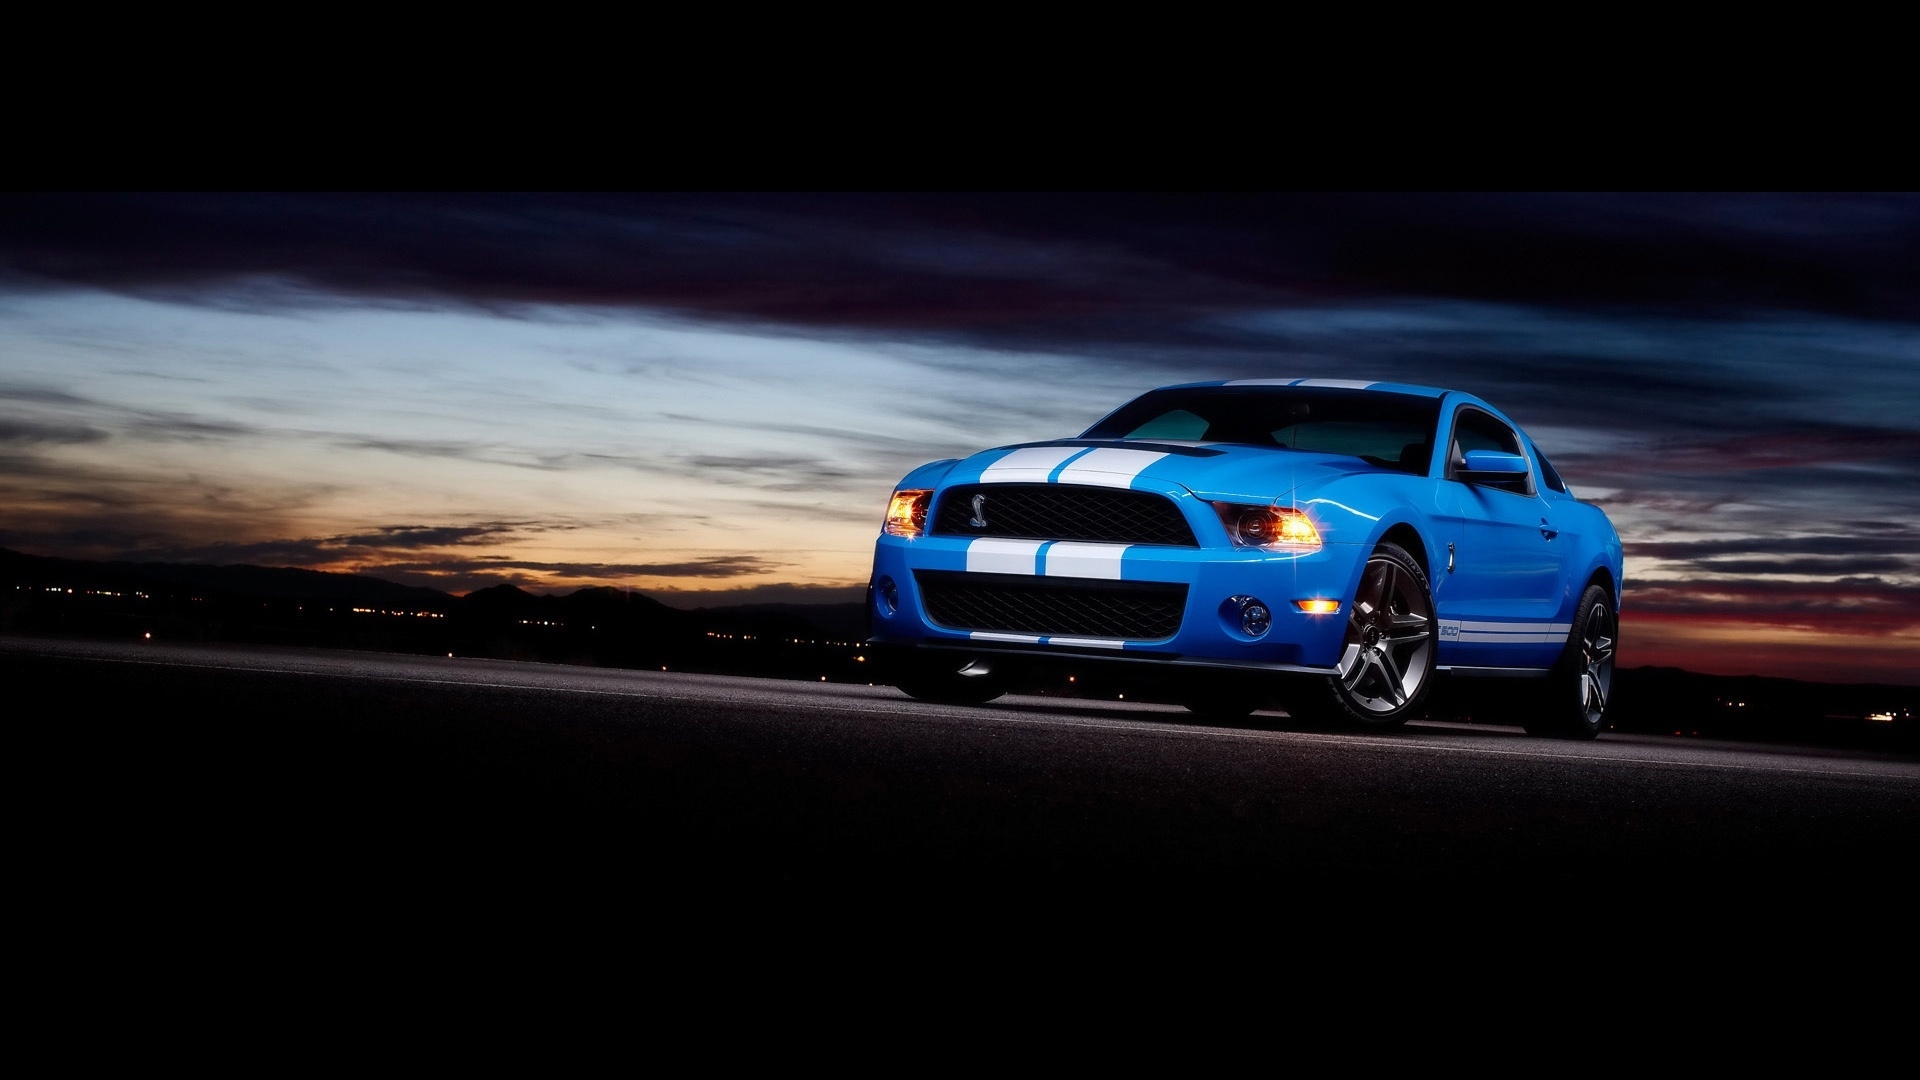 Ford Shelby GT500 Front Angle for 1920 x 1080 HDTV 1080p resolution